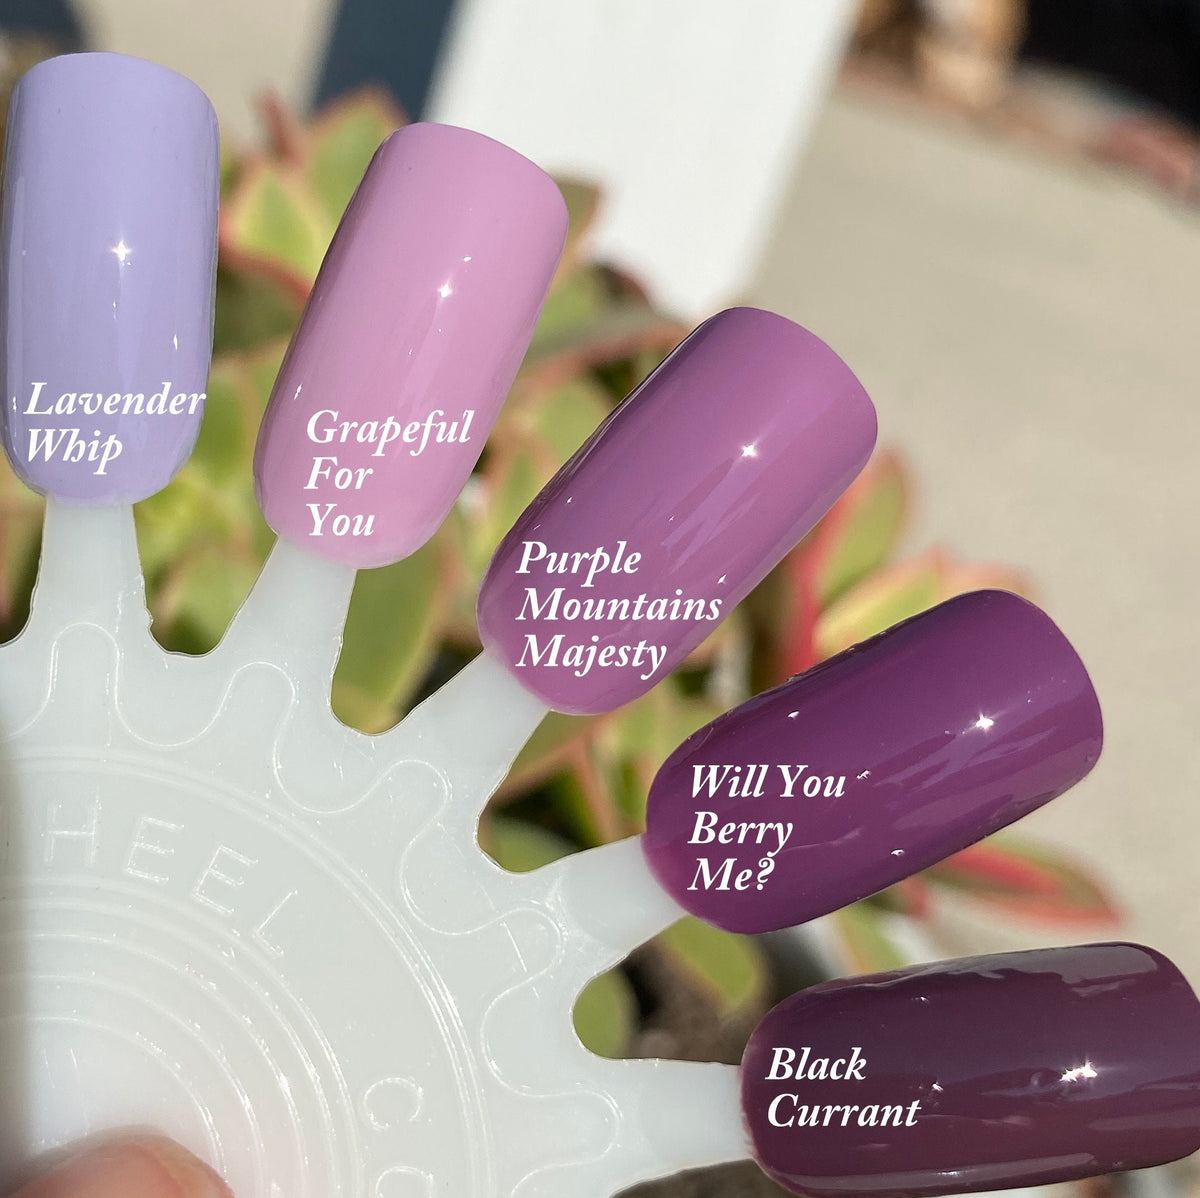 Summer Nails: Nail Trends for Summer 2023 | The New Knew